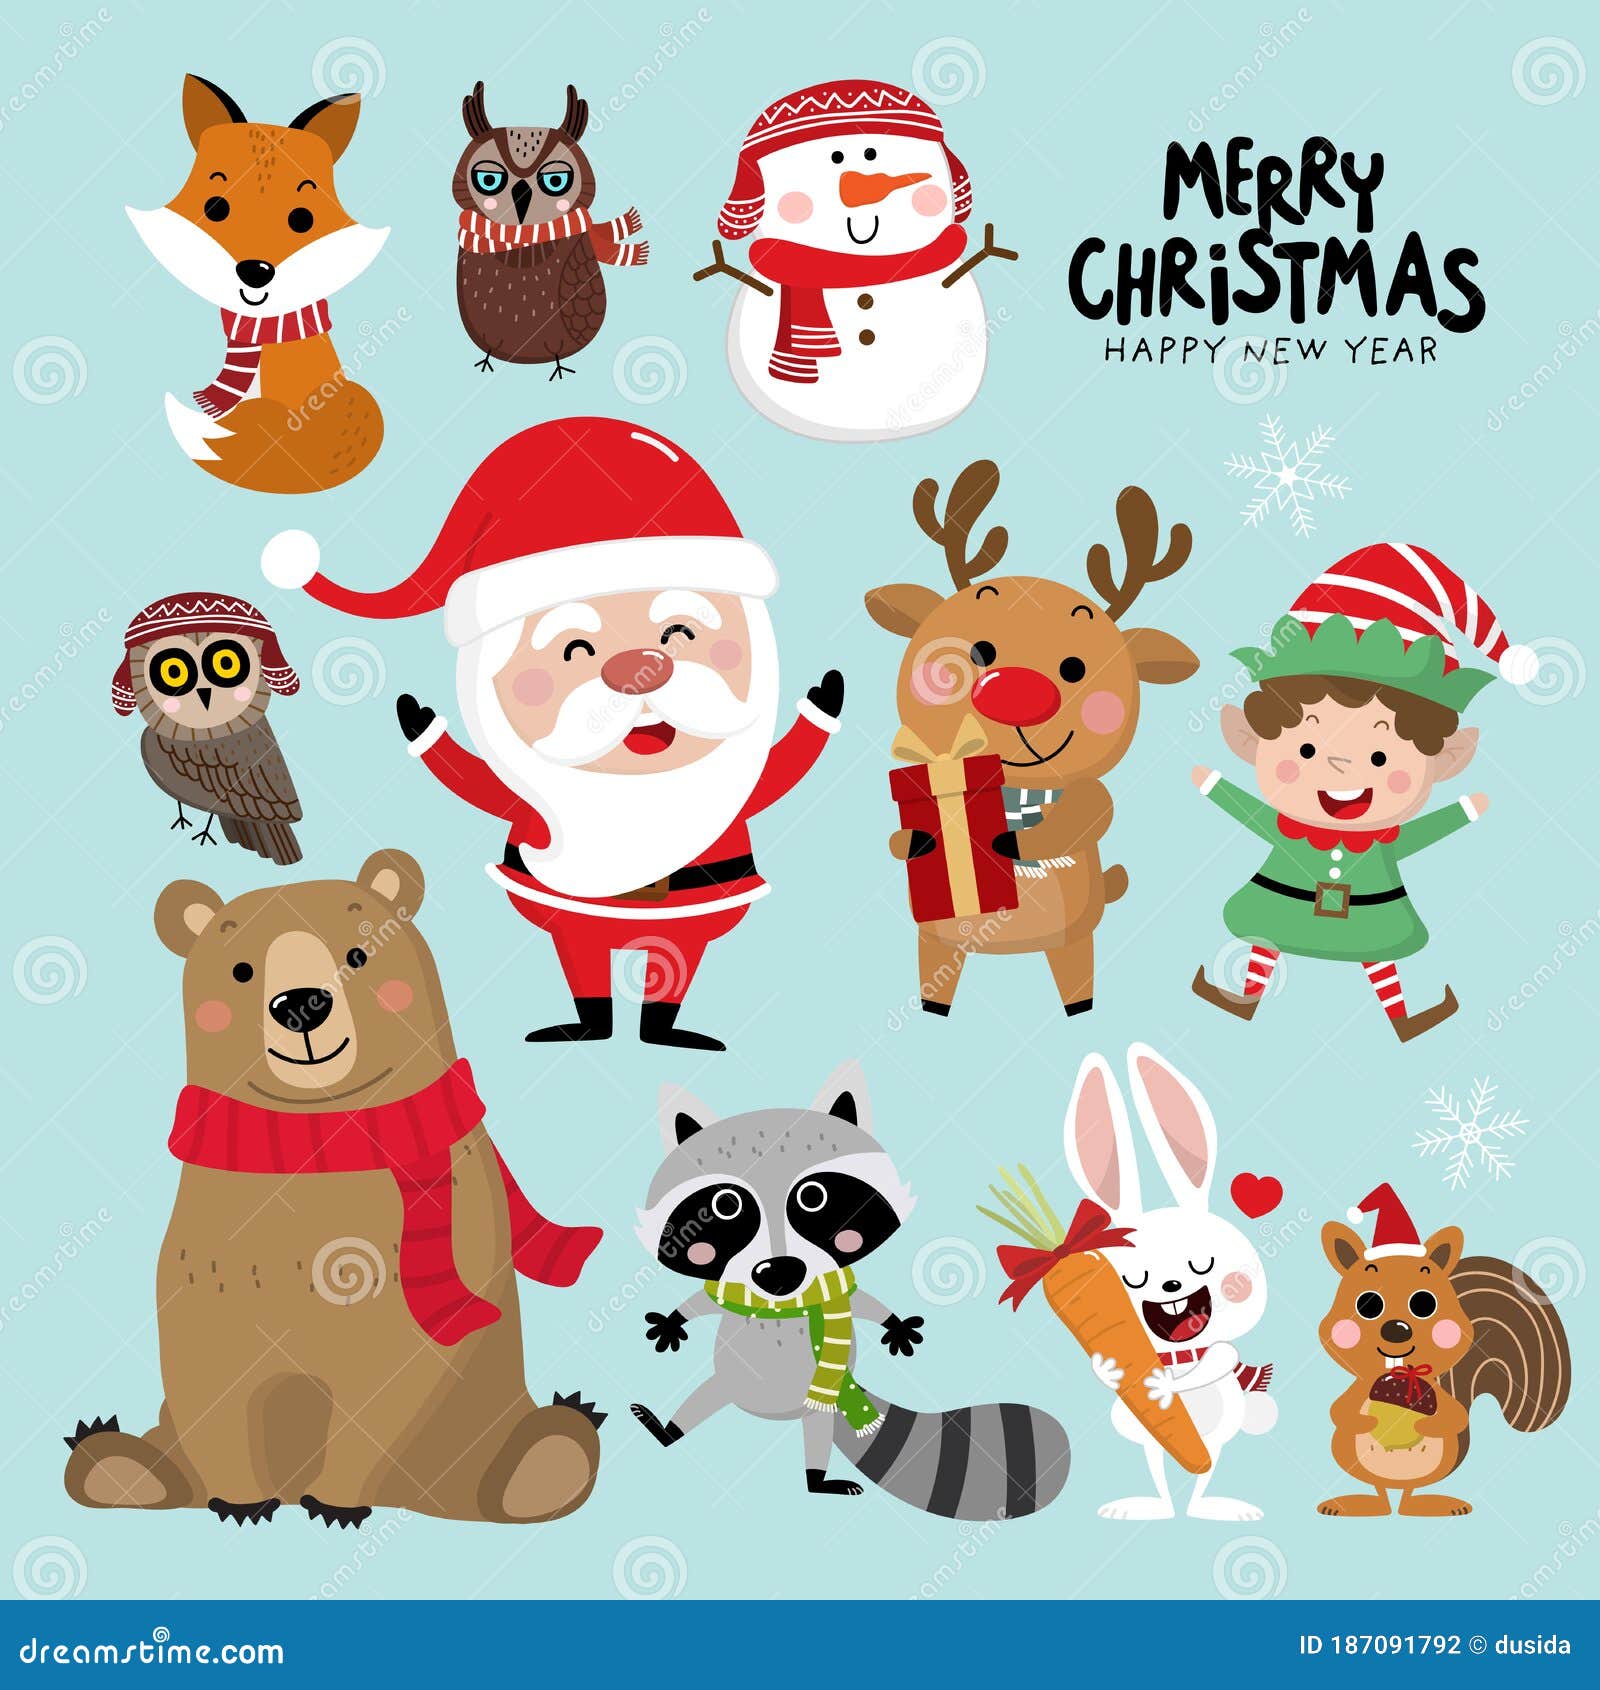 Cute Forest Animals and Santa Claus in Christmas Holidays. Wildlife Cartoon  Character Set Stock Vector - Illustration of holiday, bear: 187091792